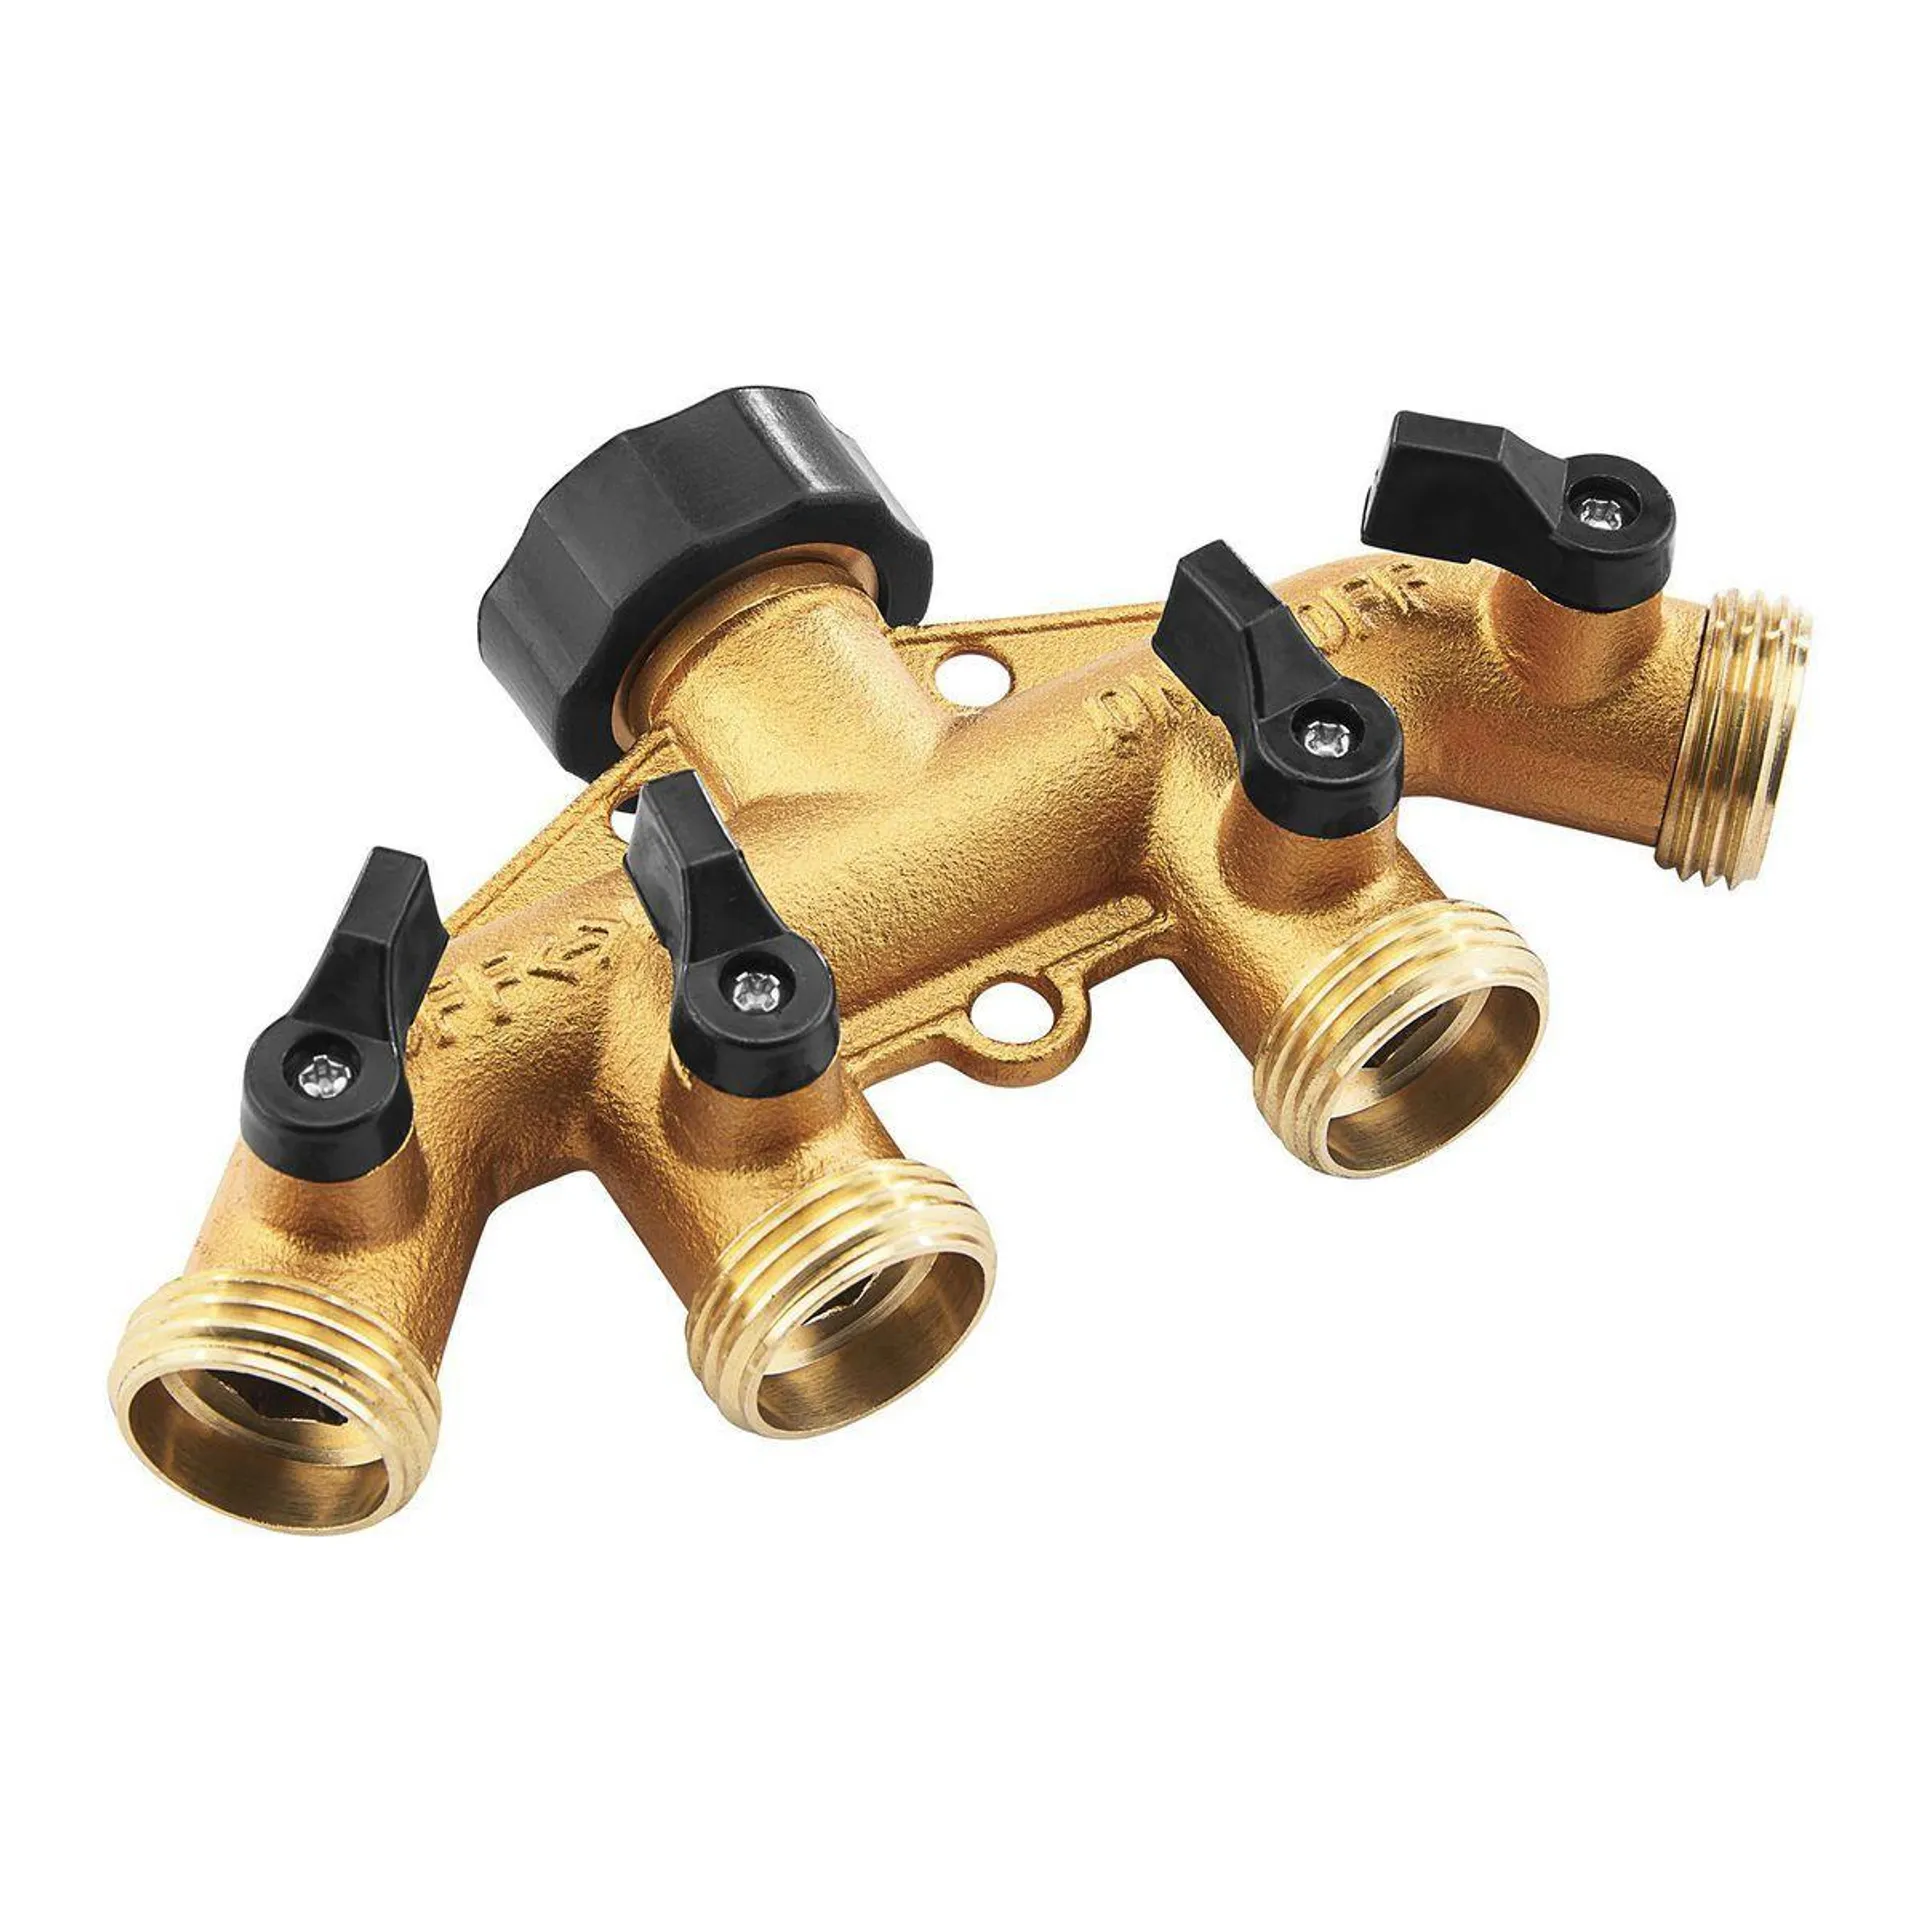 ONE STOP GARDENS 4-in-1 Solid Brass Faucet Expander